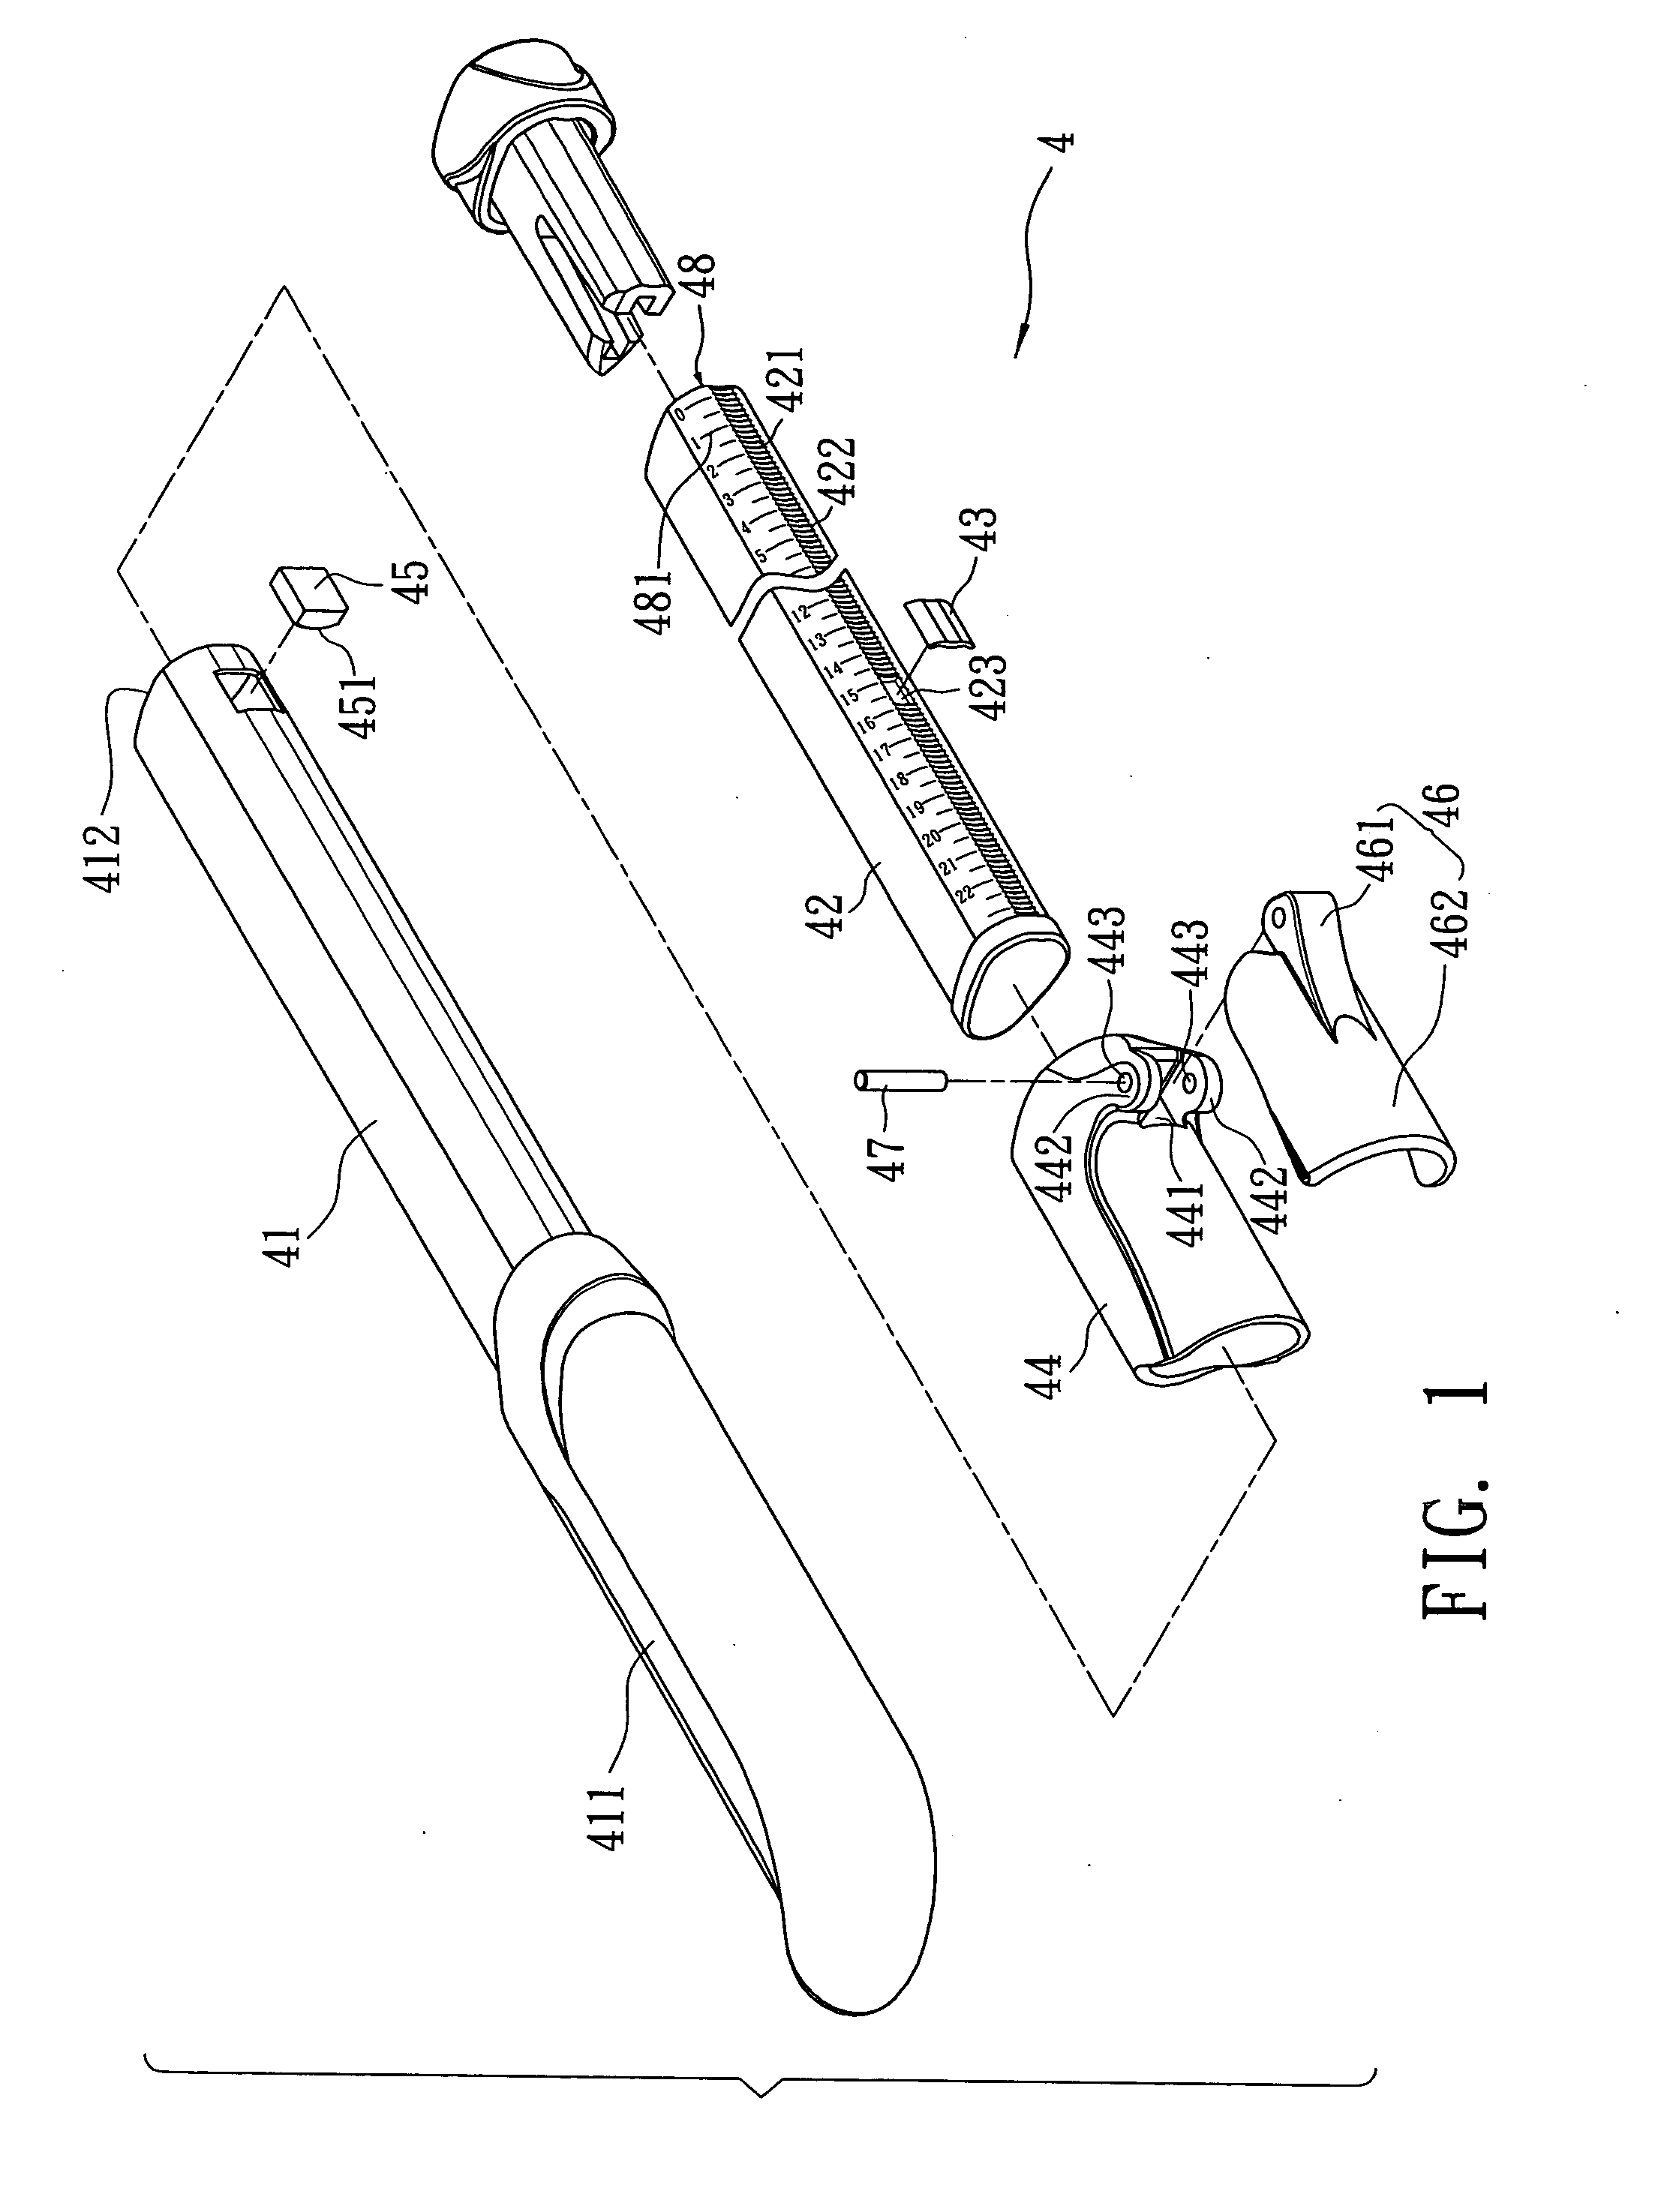 Adjustment structure of garden shears